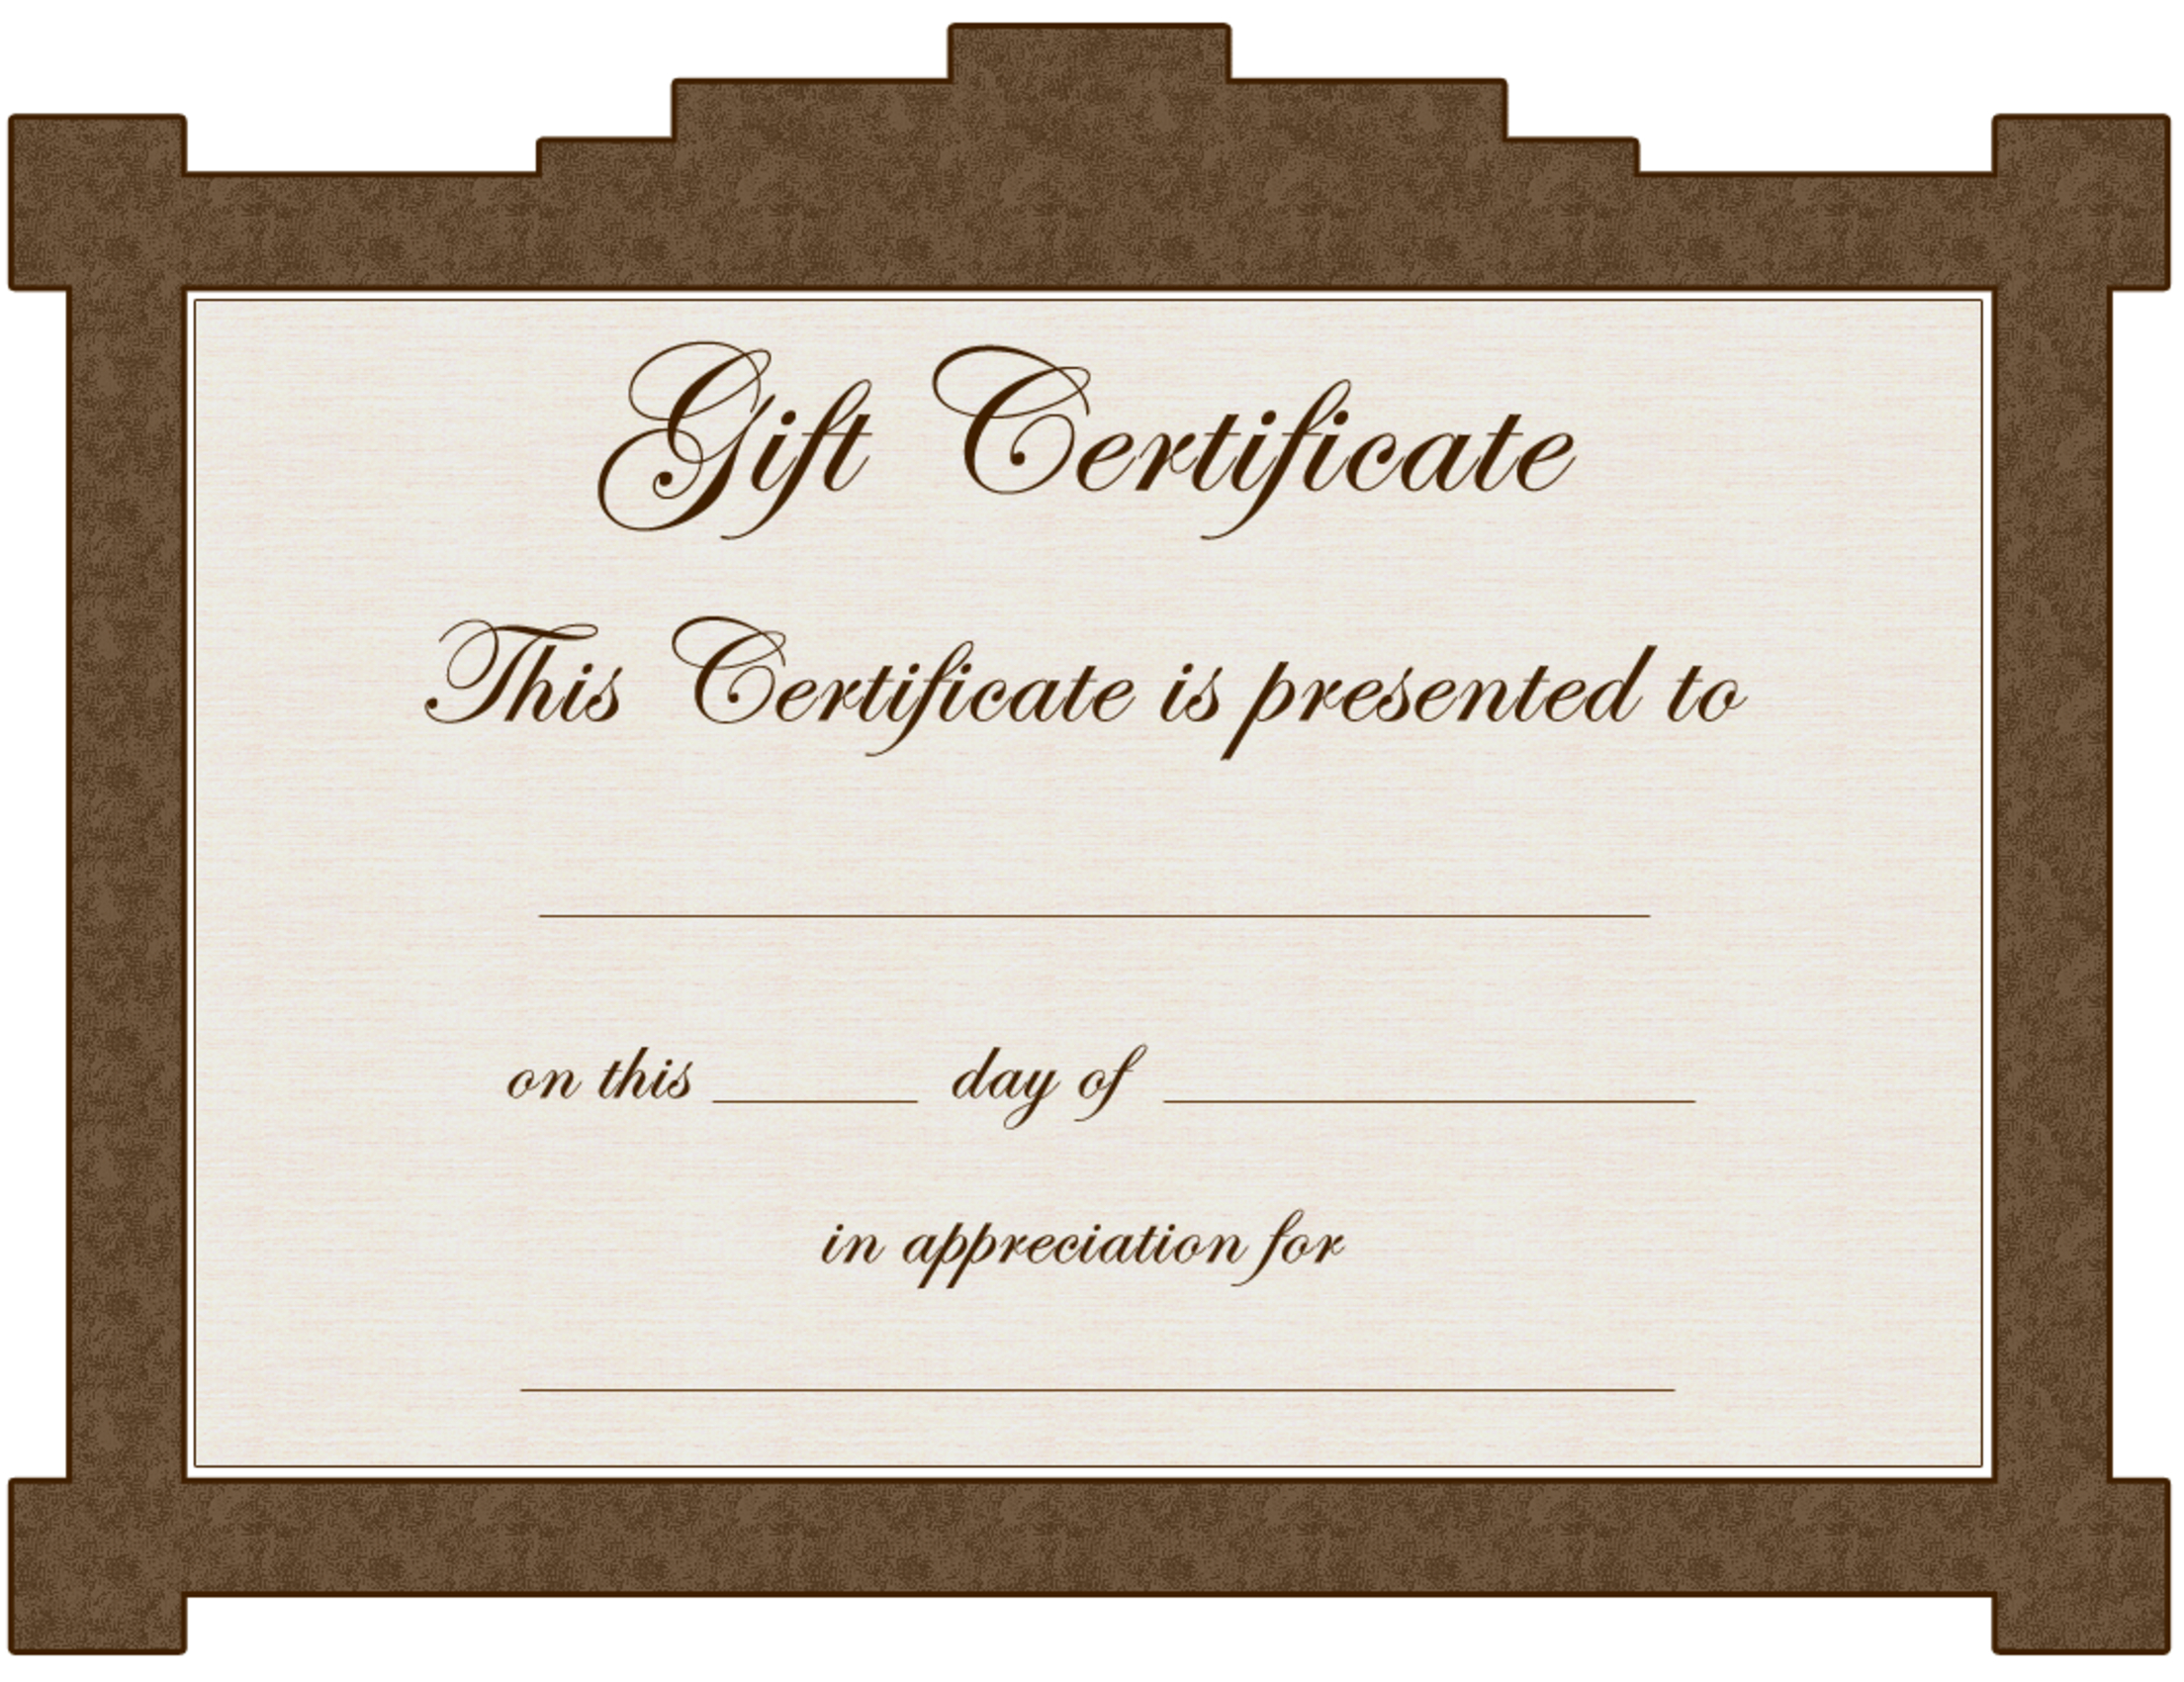 Clipart Gift Certificate Template Intended For Graduation Gift Certificate Template Free